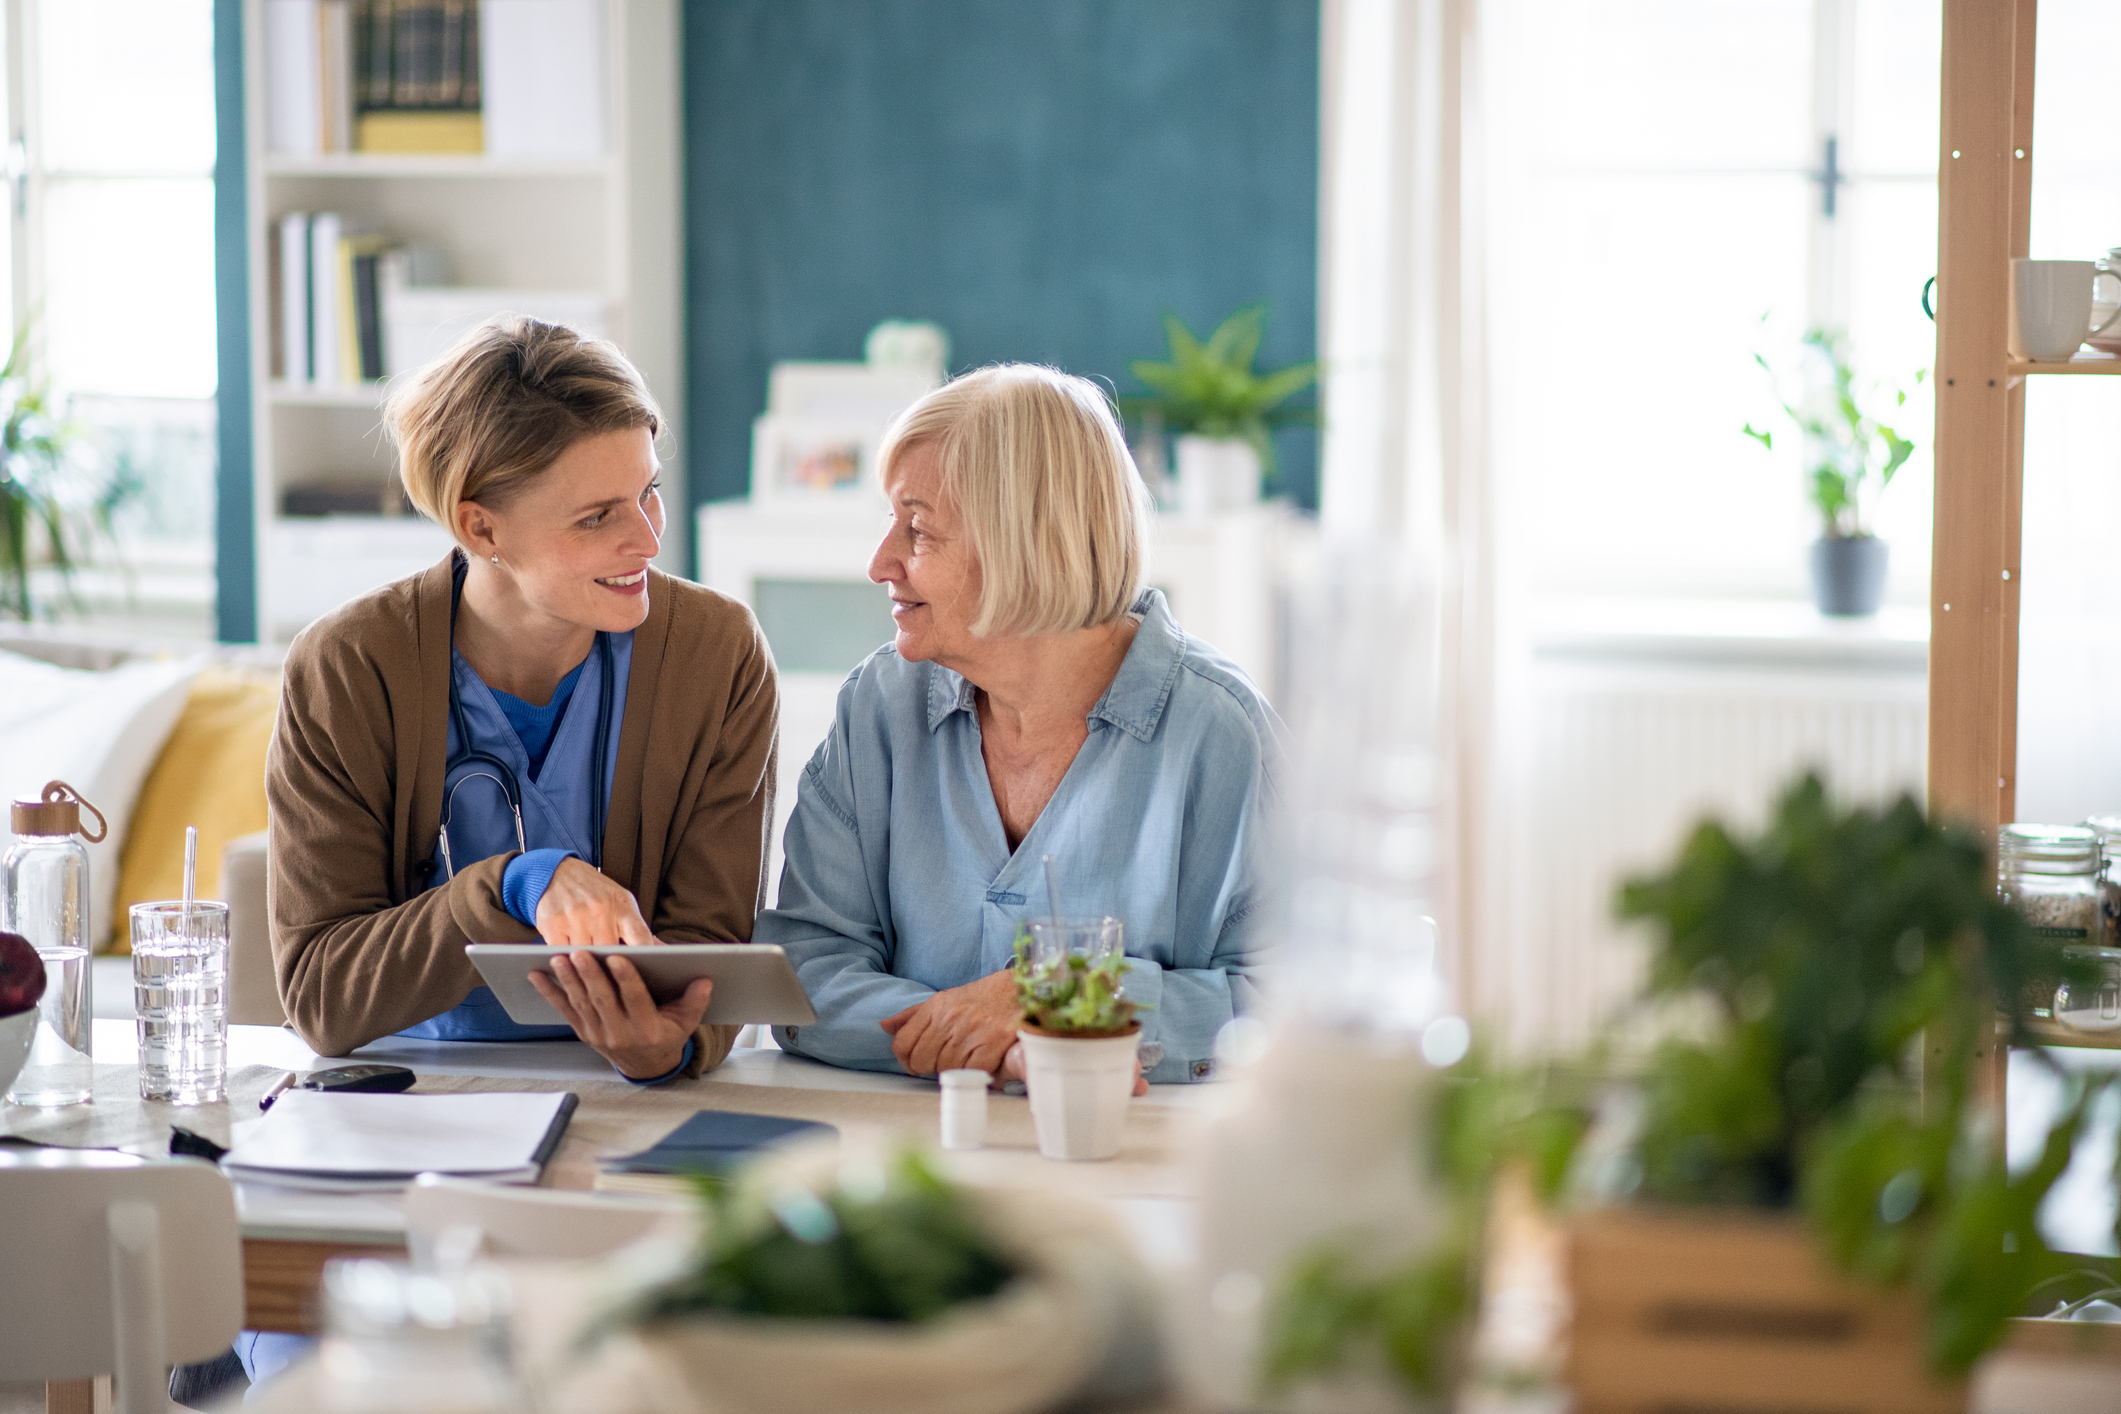 home health care marketing - Caregiver or healthcare worker with senior woman patient, using a tablet and explaining.